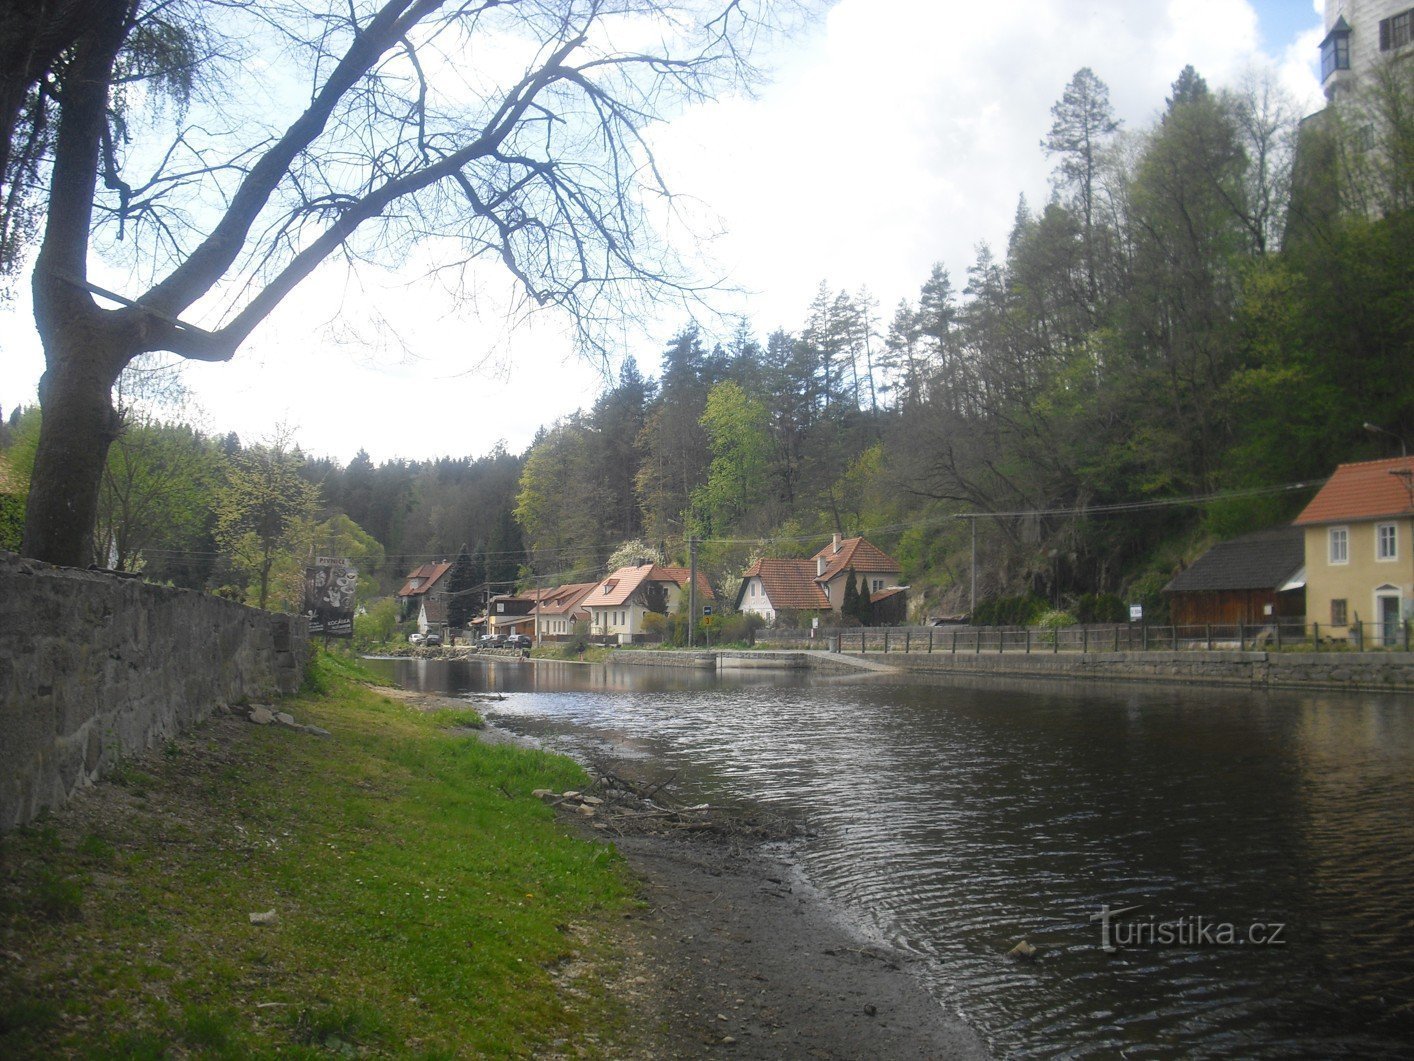 Rožmberk and one of the oldest castles of the Vítkov family